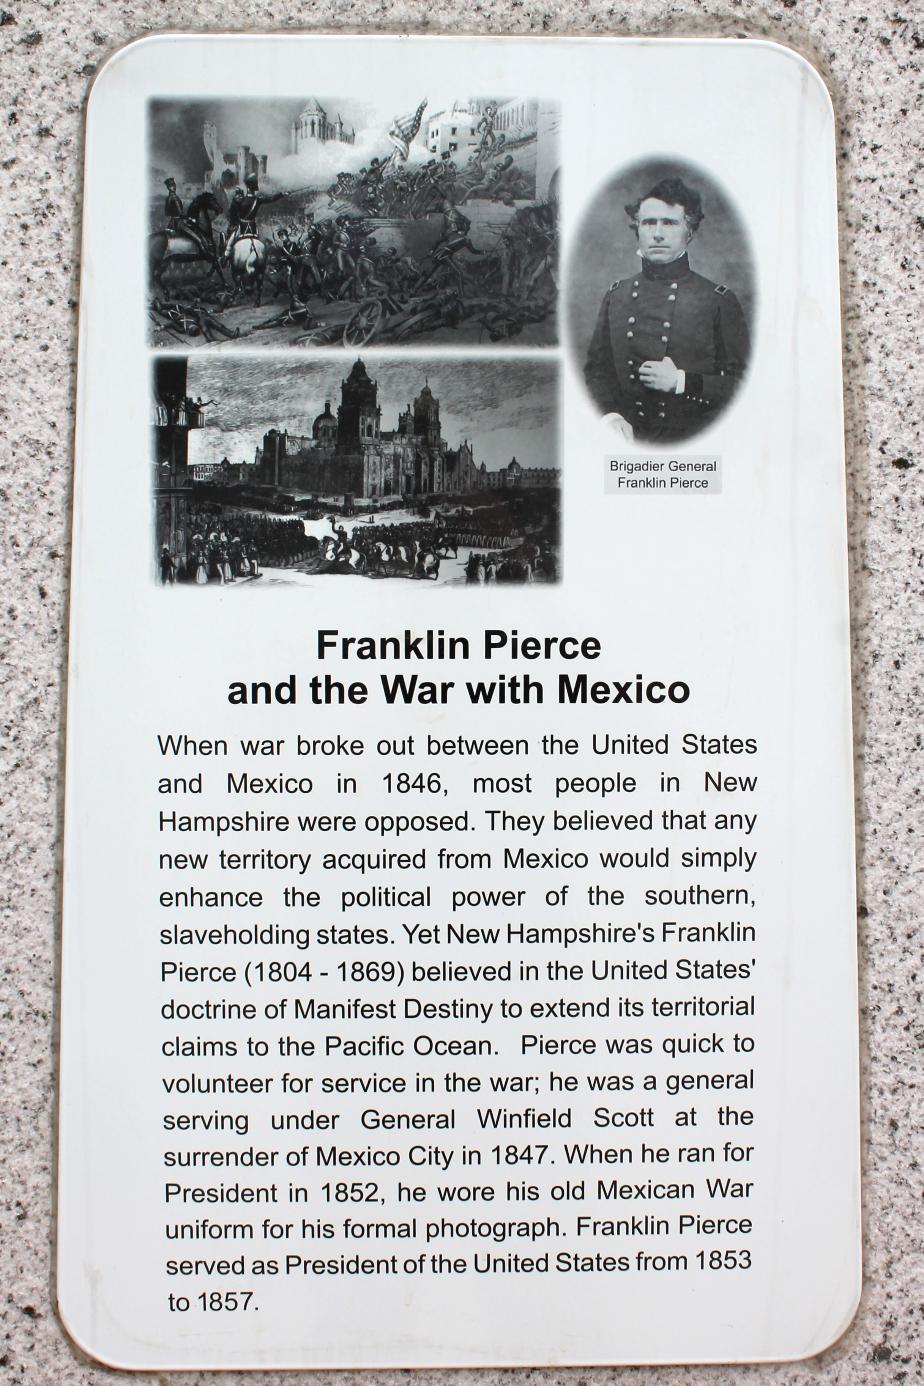 NH State Veterans Cemetery - Franklin Pierce & the War with Mexico